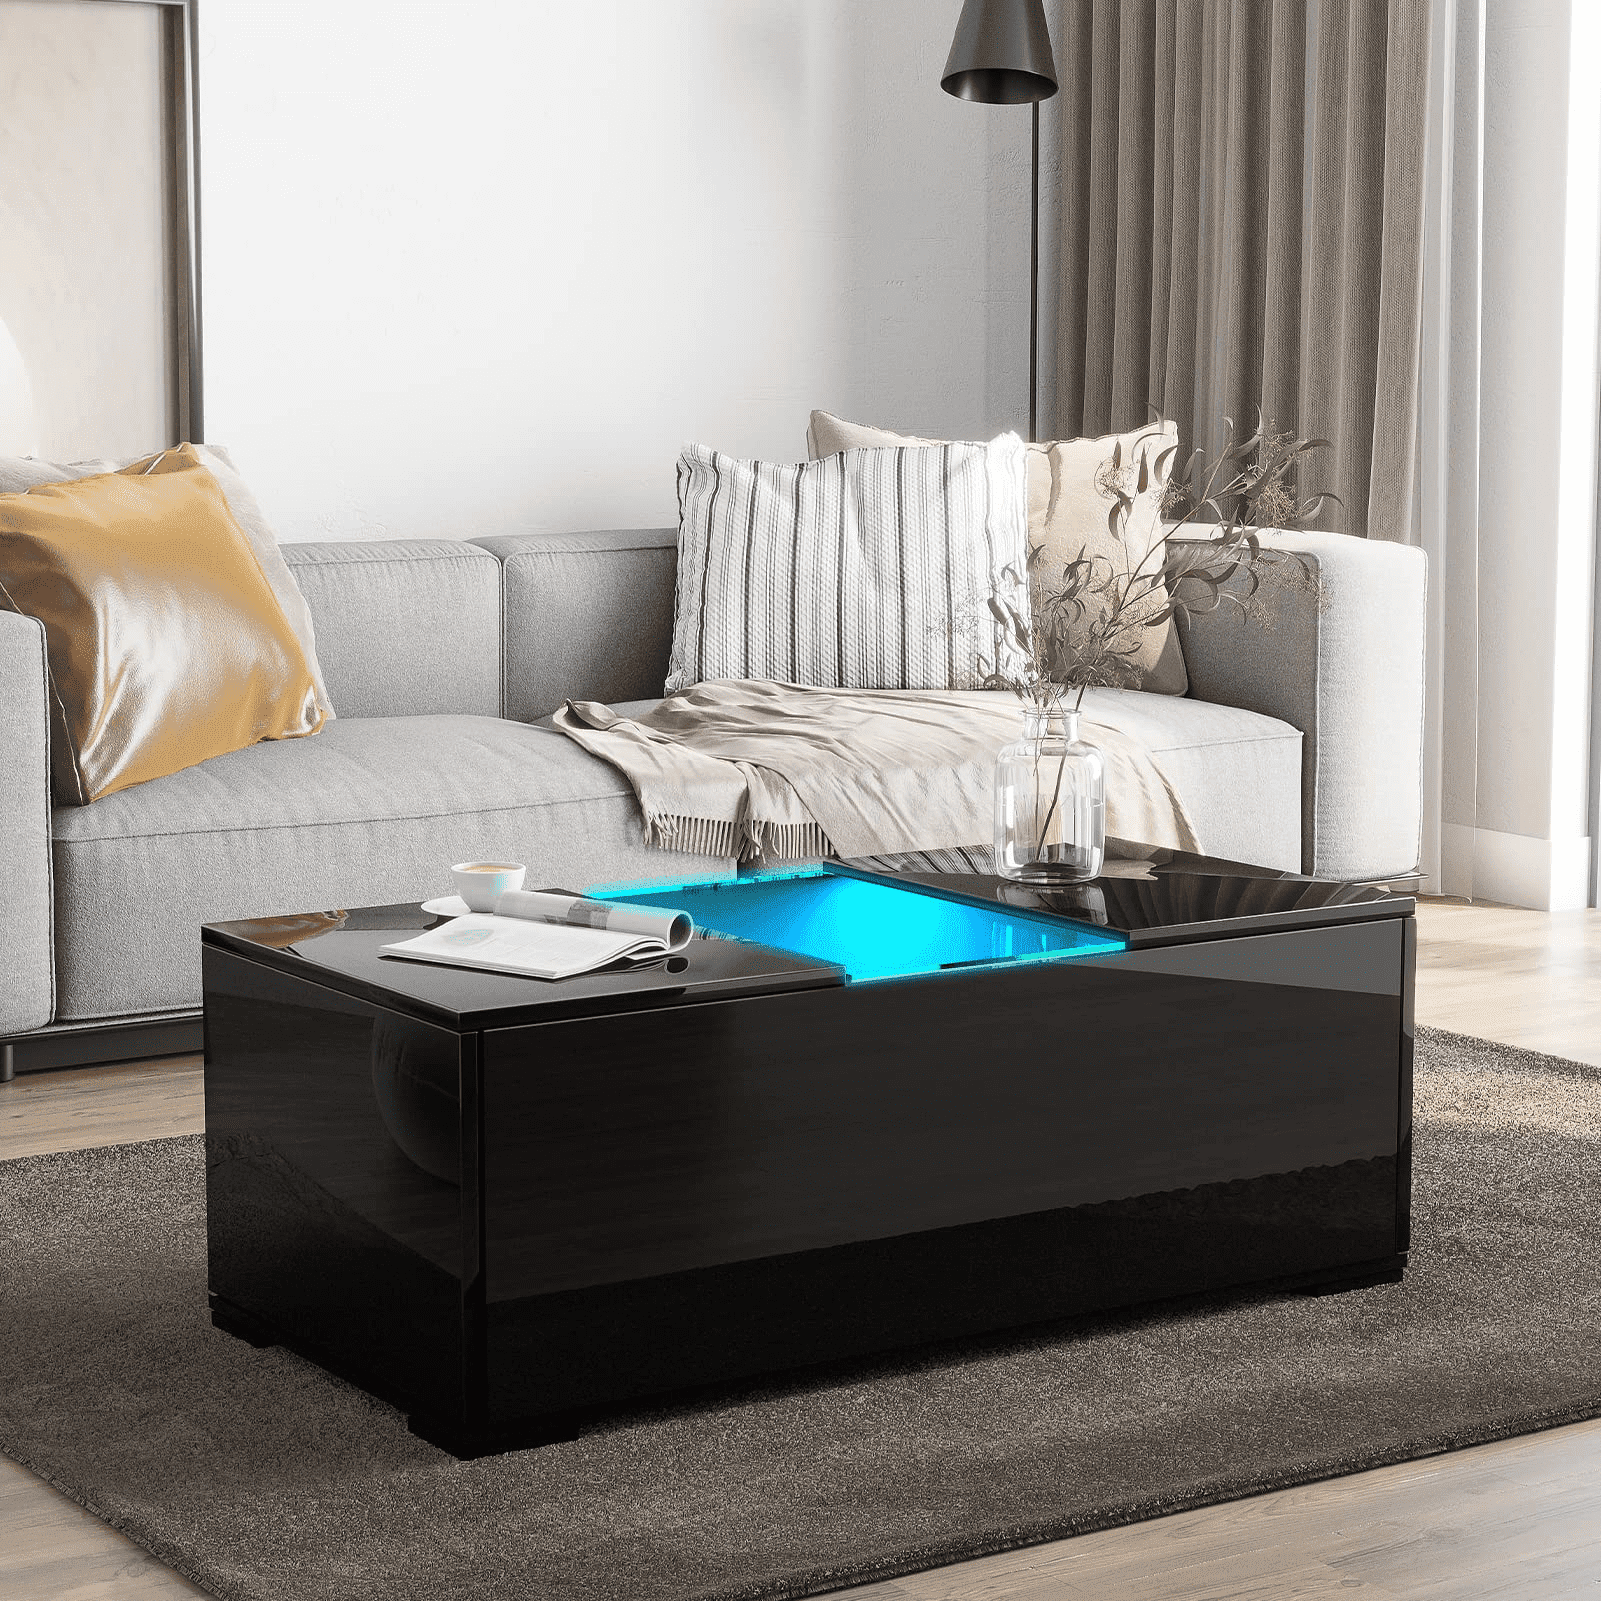 Chvans Led Coffee Tables With Storage, Rectangle High Gloss Coffee Table  With 20 Colors Led Lights For Living Room Center End Table With Glass  Tabletop & Remote – Walmart Within Rectangular Led Coffee Tables (View 8 of 15)